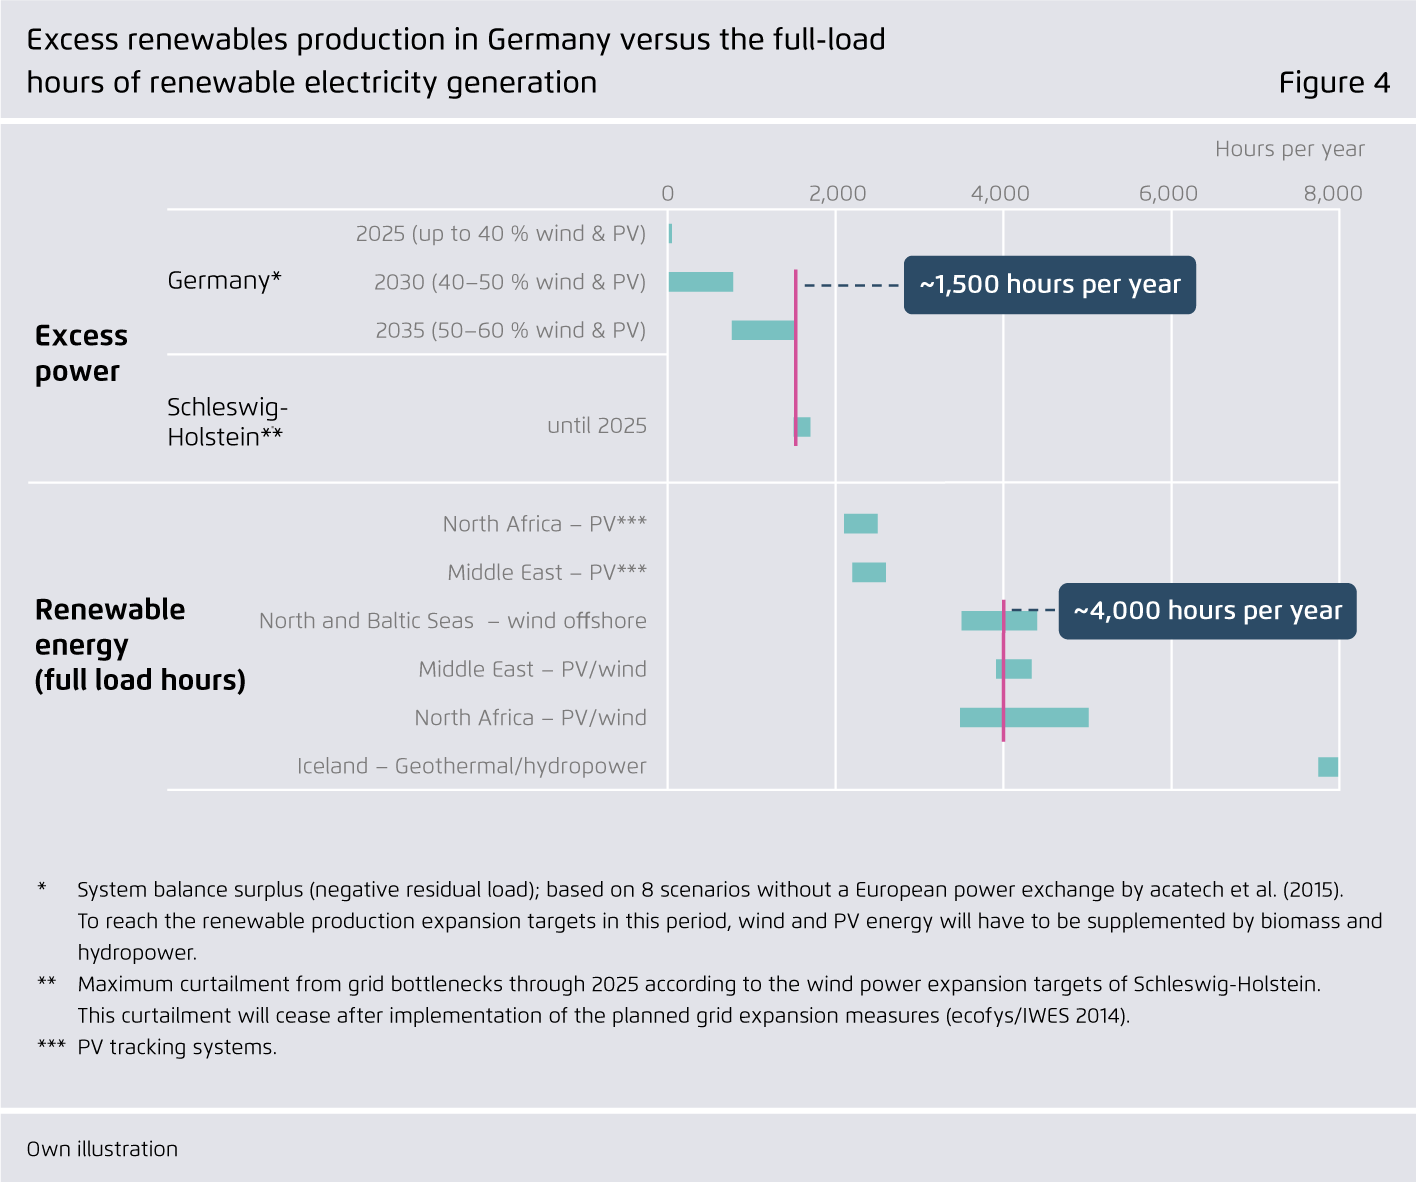 Preview for Excess renewables production in Germany versus the full-load hours of renewable electricity generation